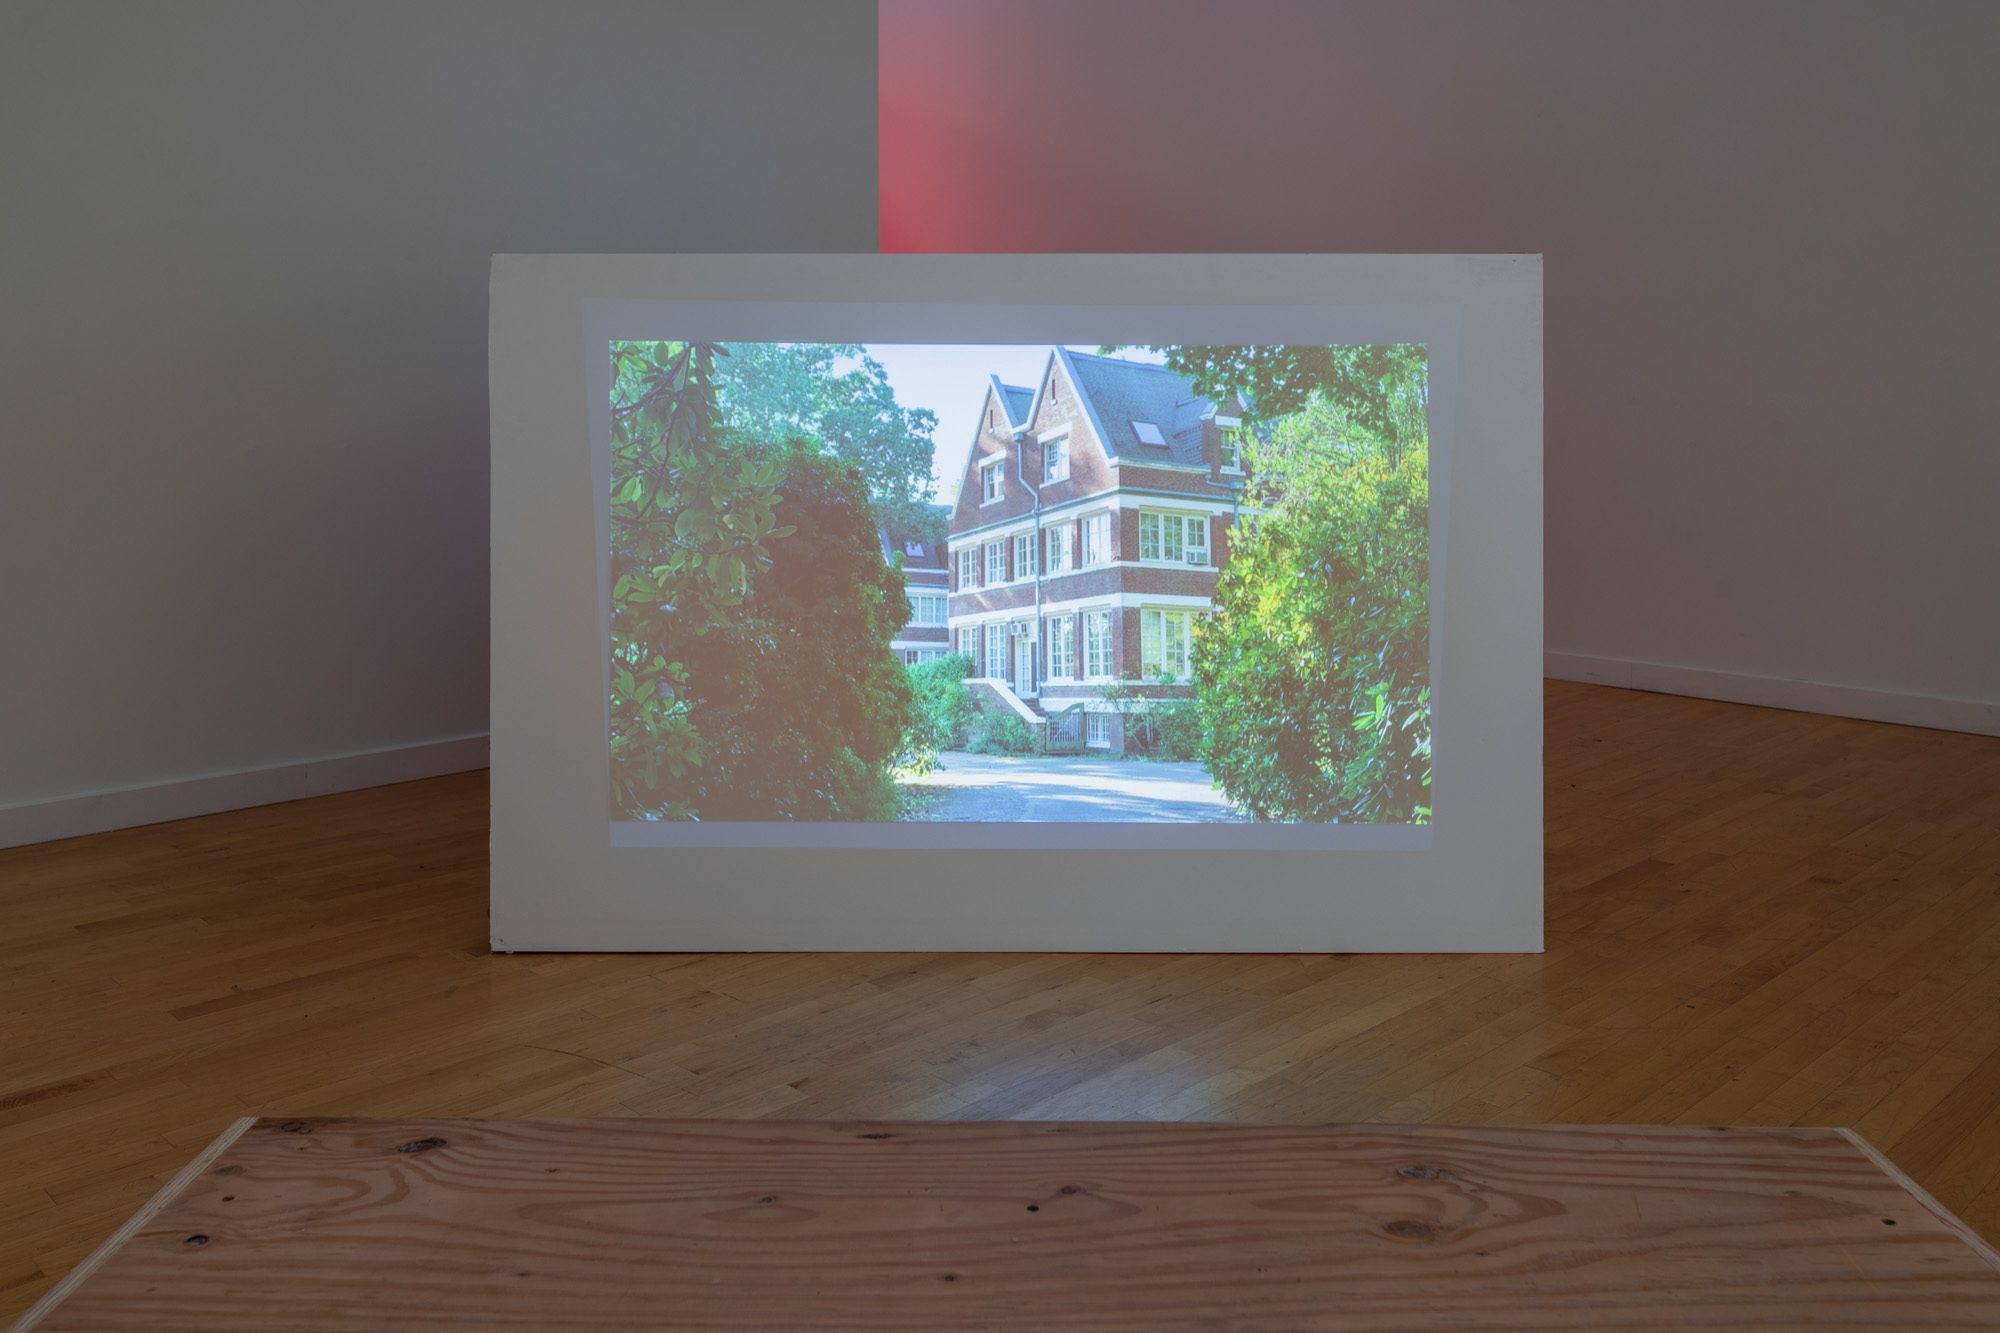 Large white panel in galery room with image of a colonial-style house surrounded by shrubbery projected upon it